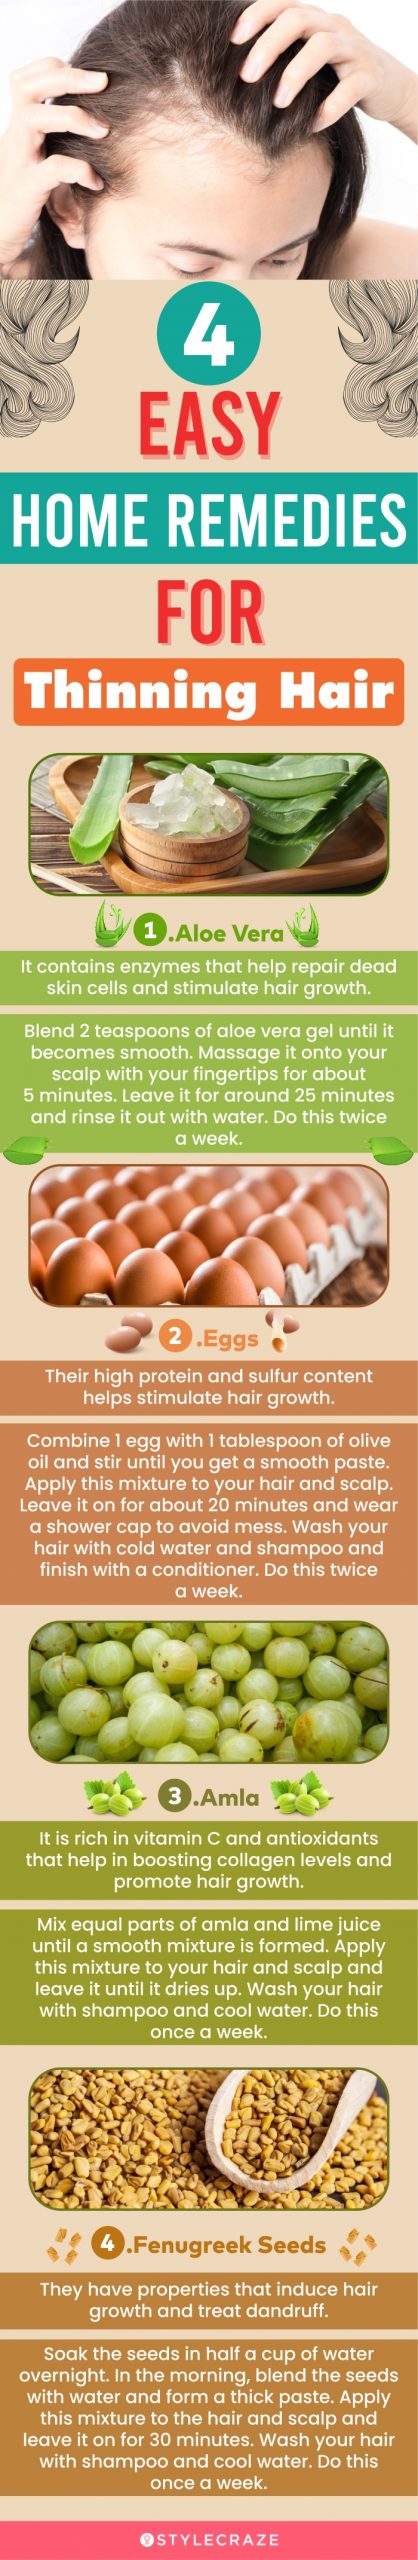 4 easy home remedies for thinning hair (infographic)